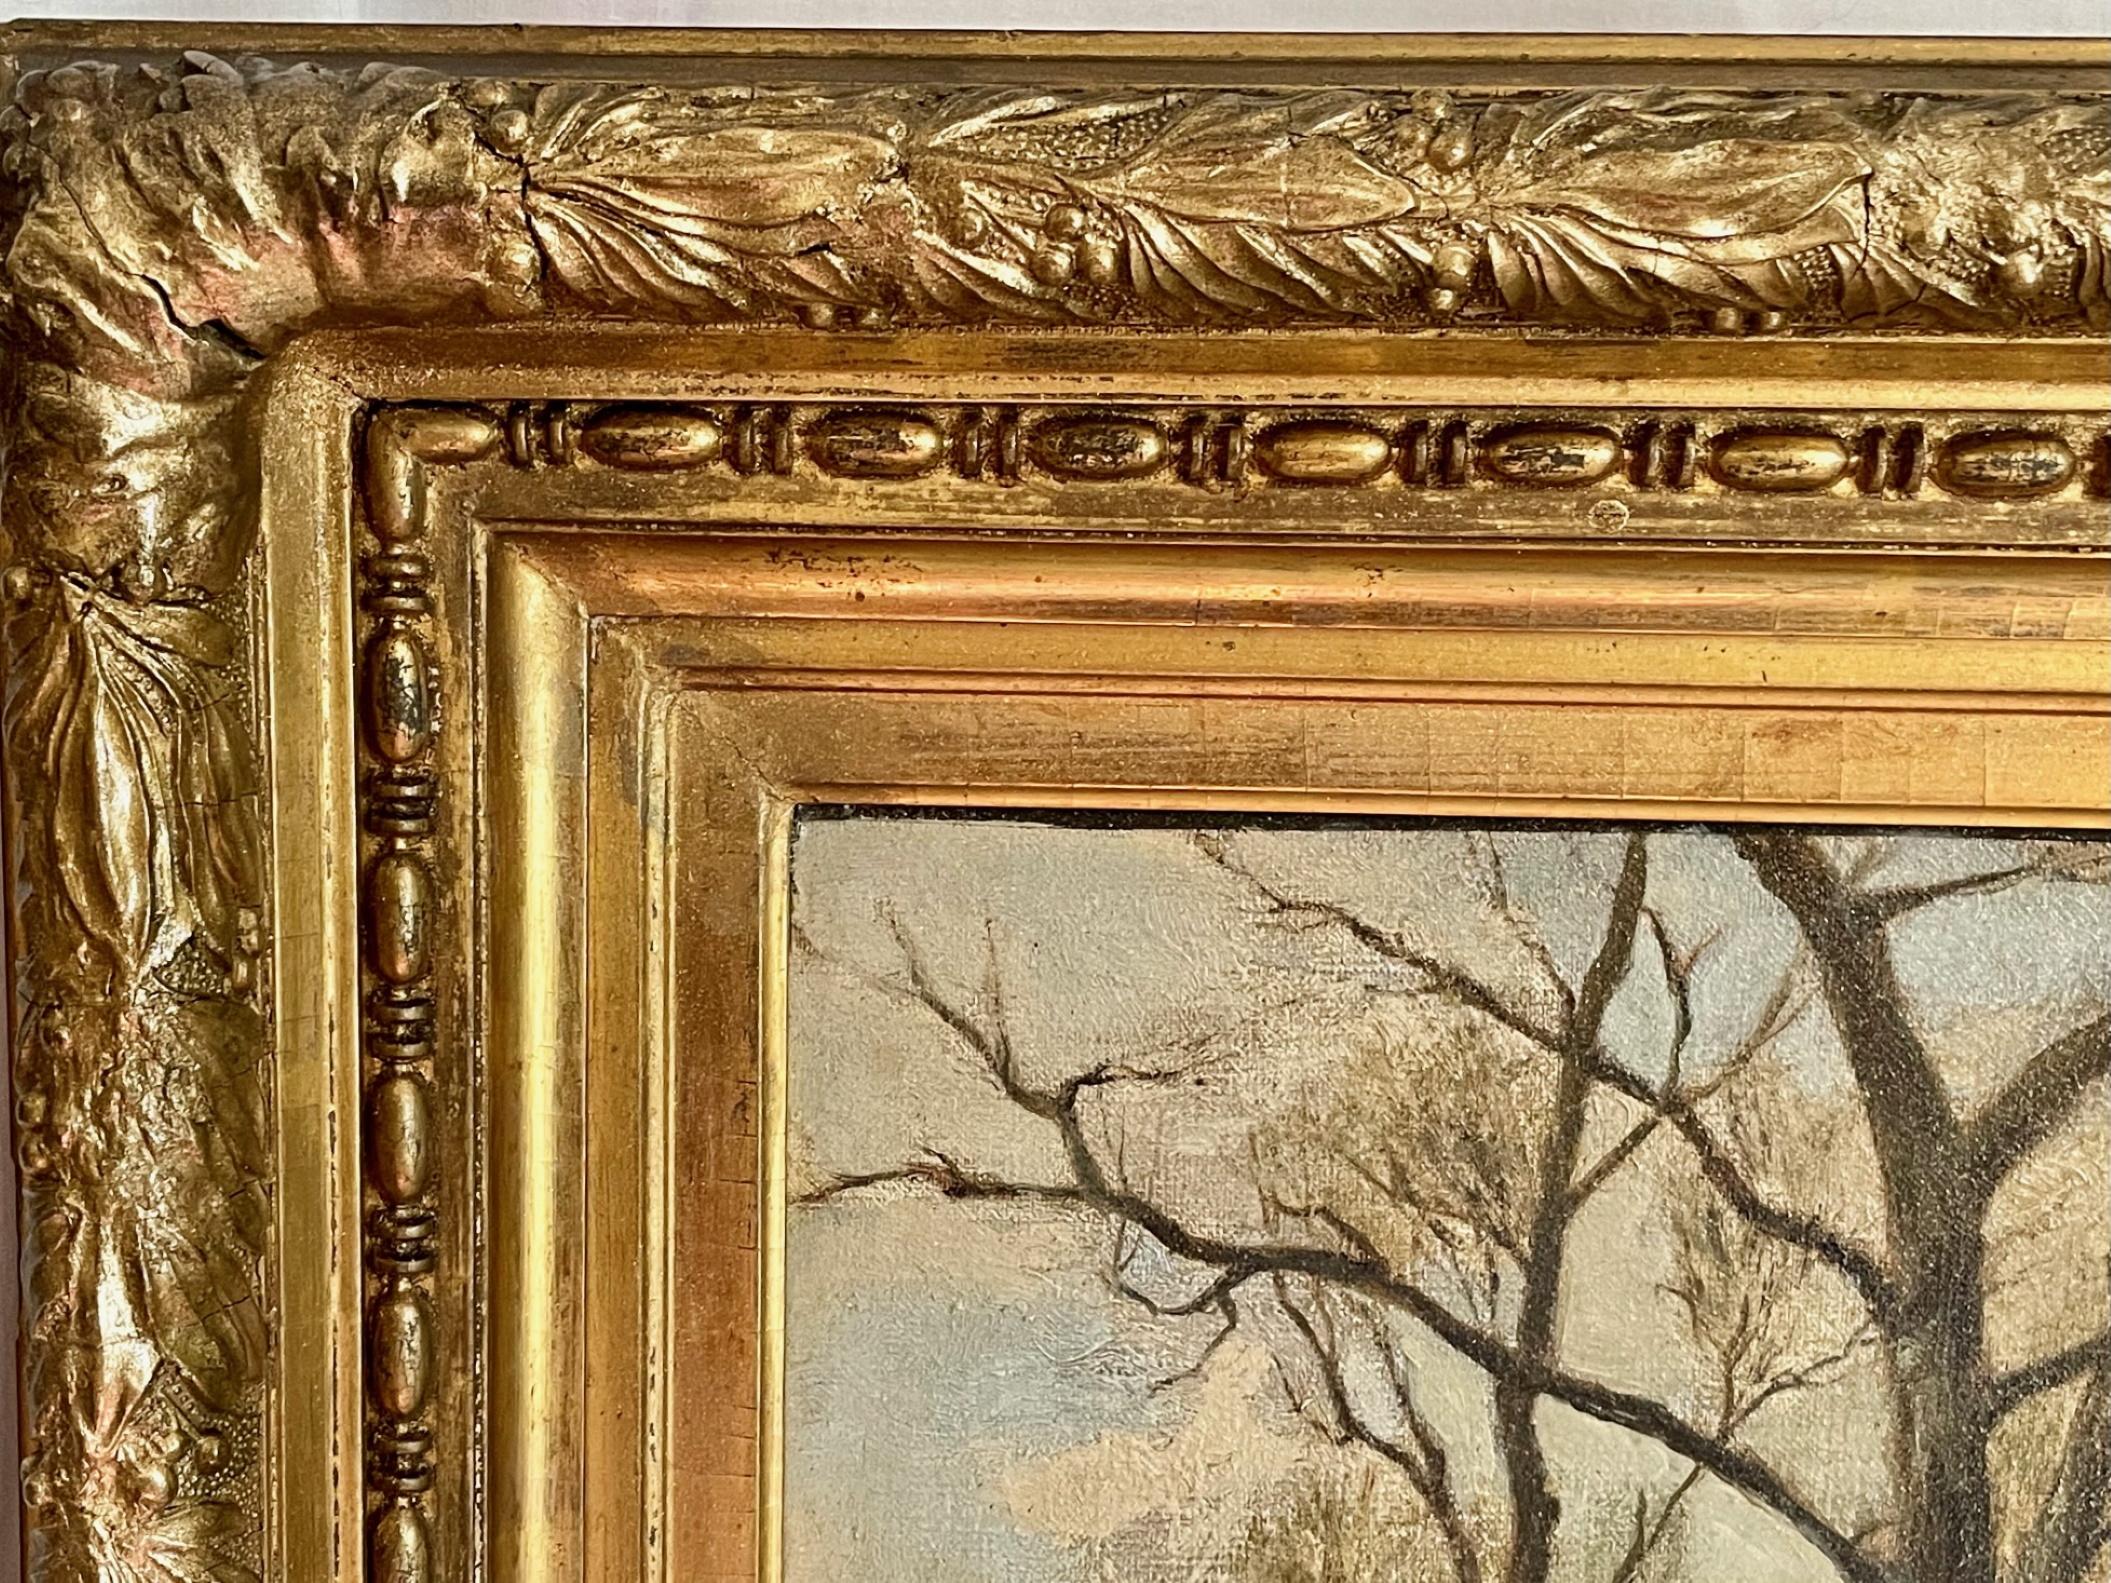 Hand-Painted Large 19th Century Signed American Landscape Painting, Original Period Frame